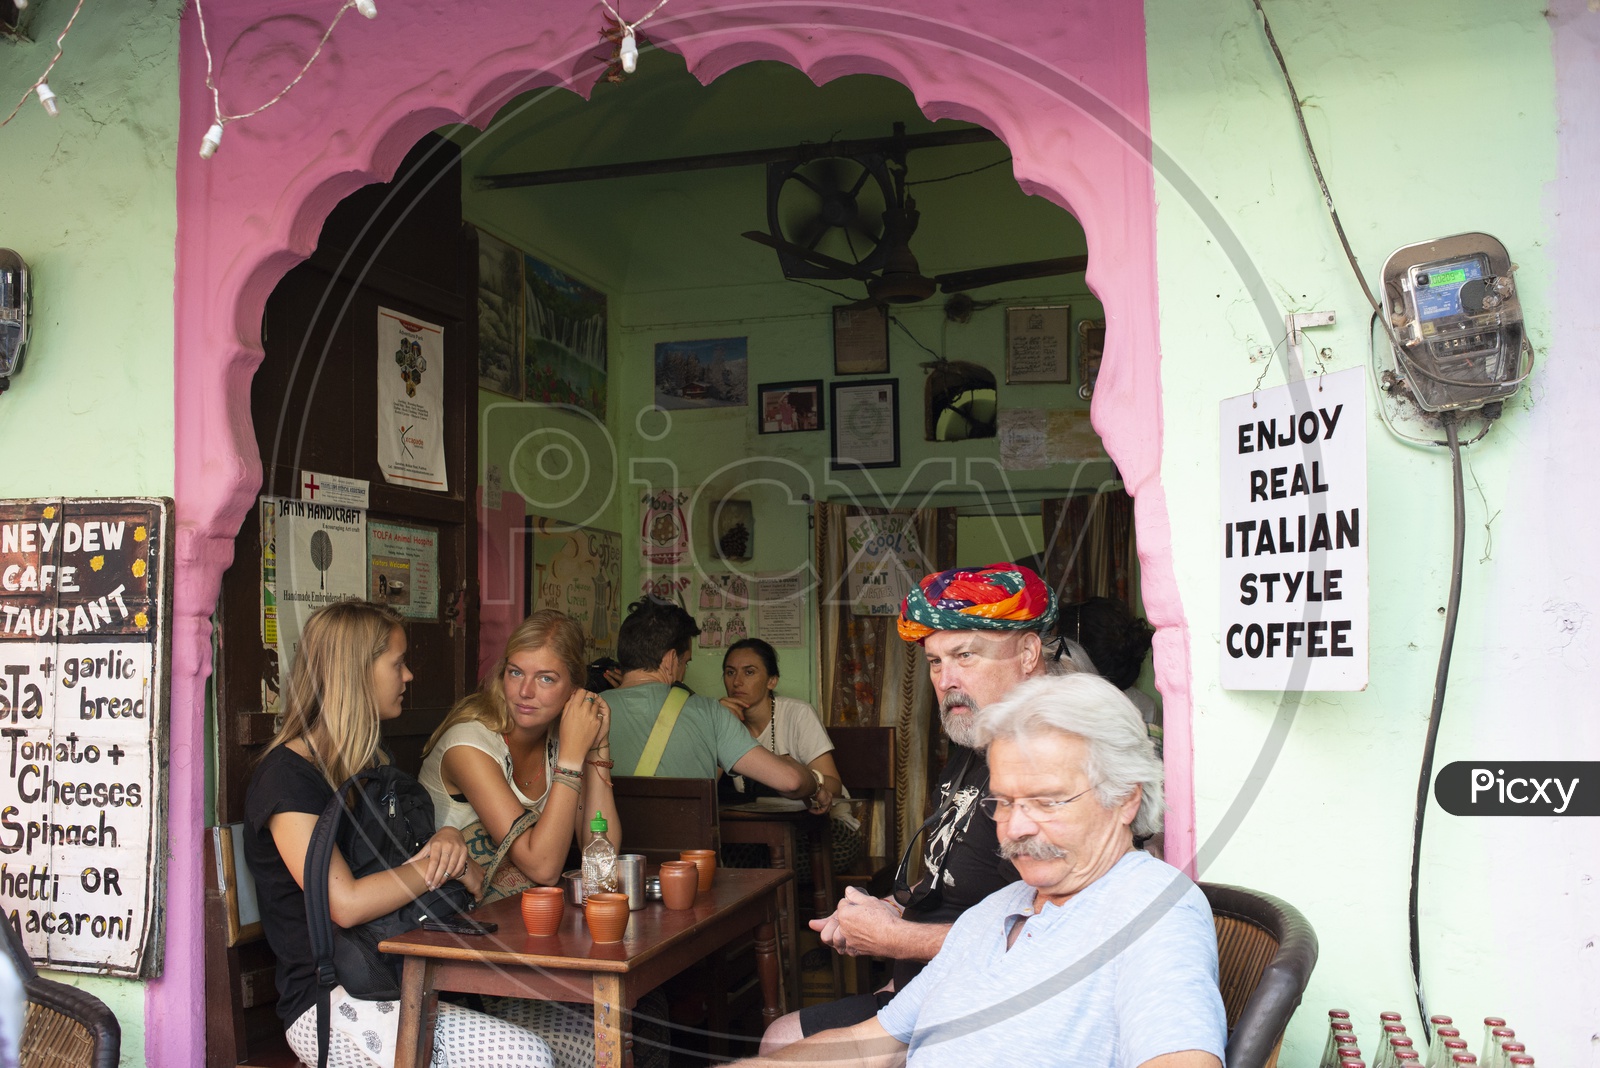 Foreign Tourists in a Italian Style Coffee Shop at Pushkar, Rajasthan